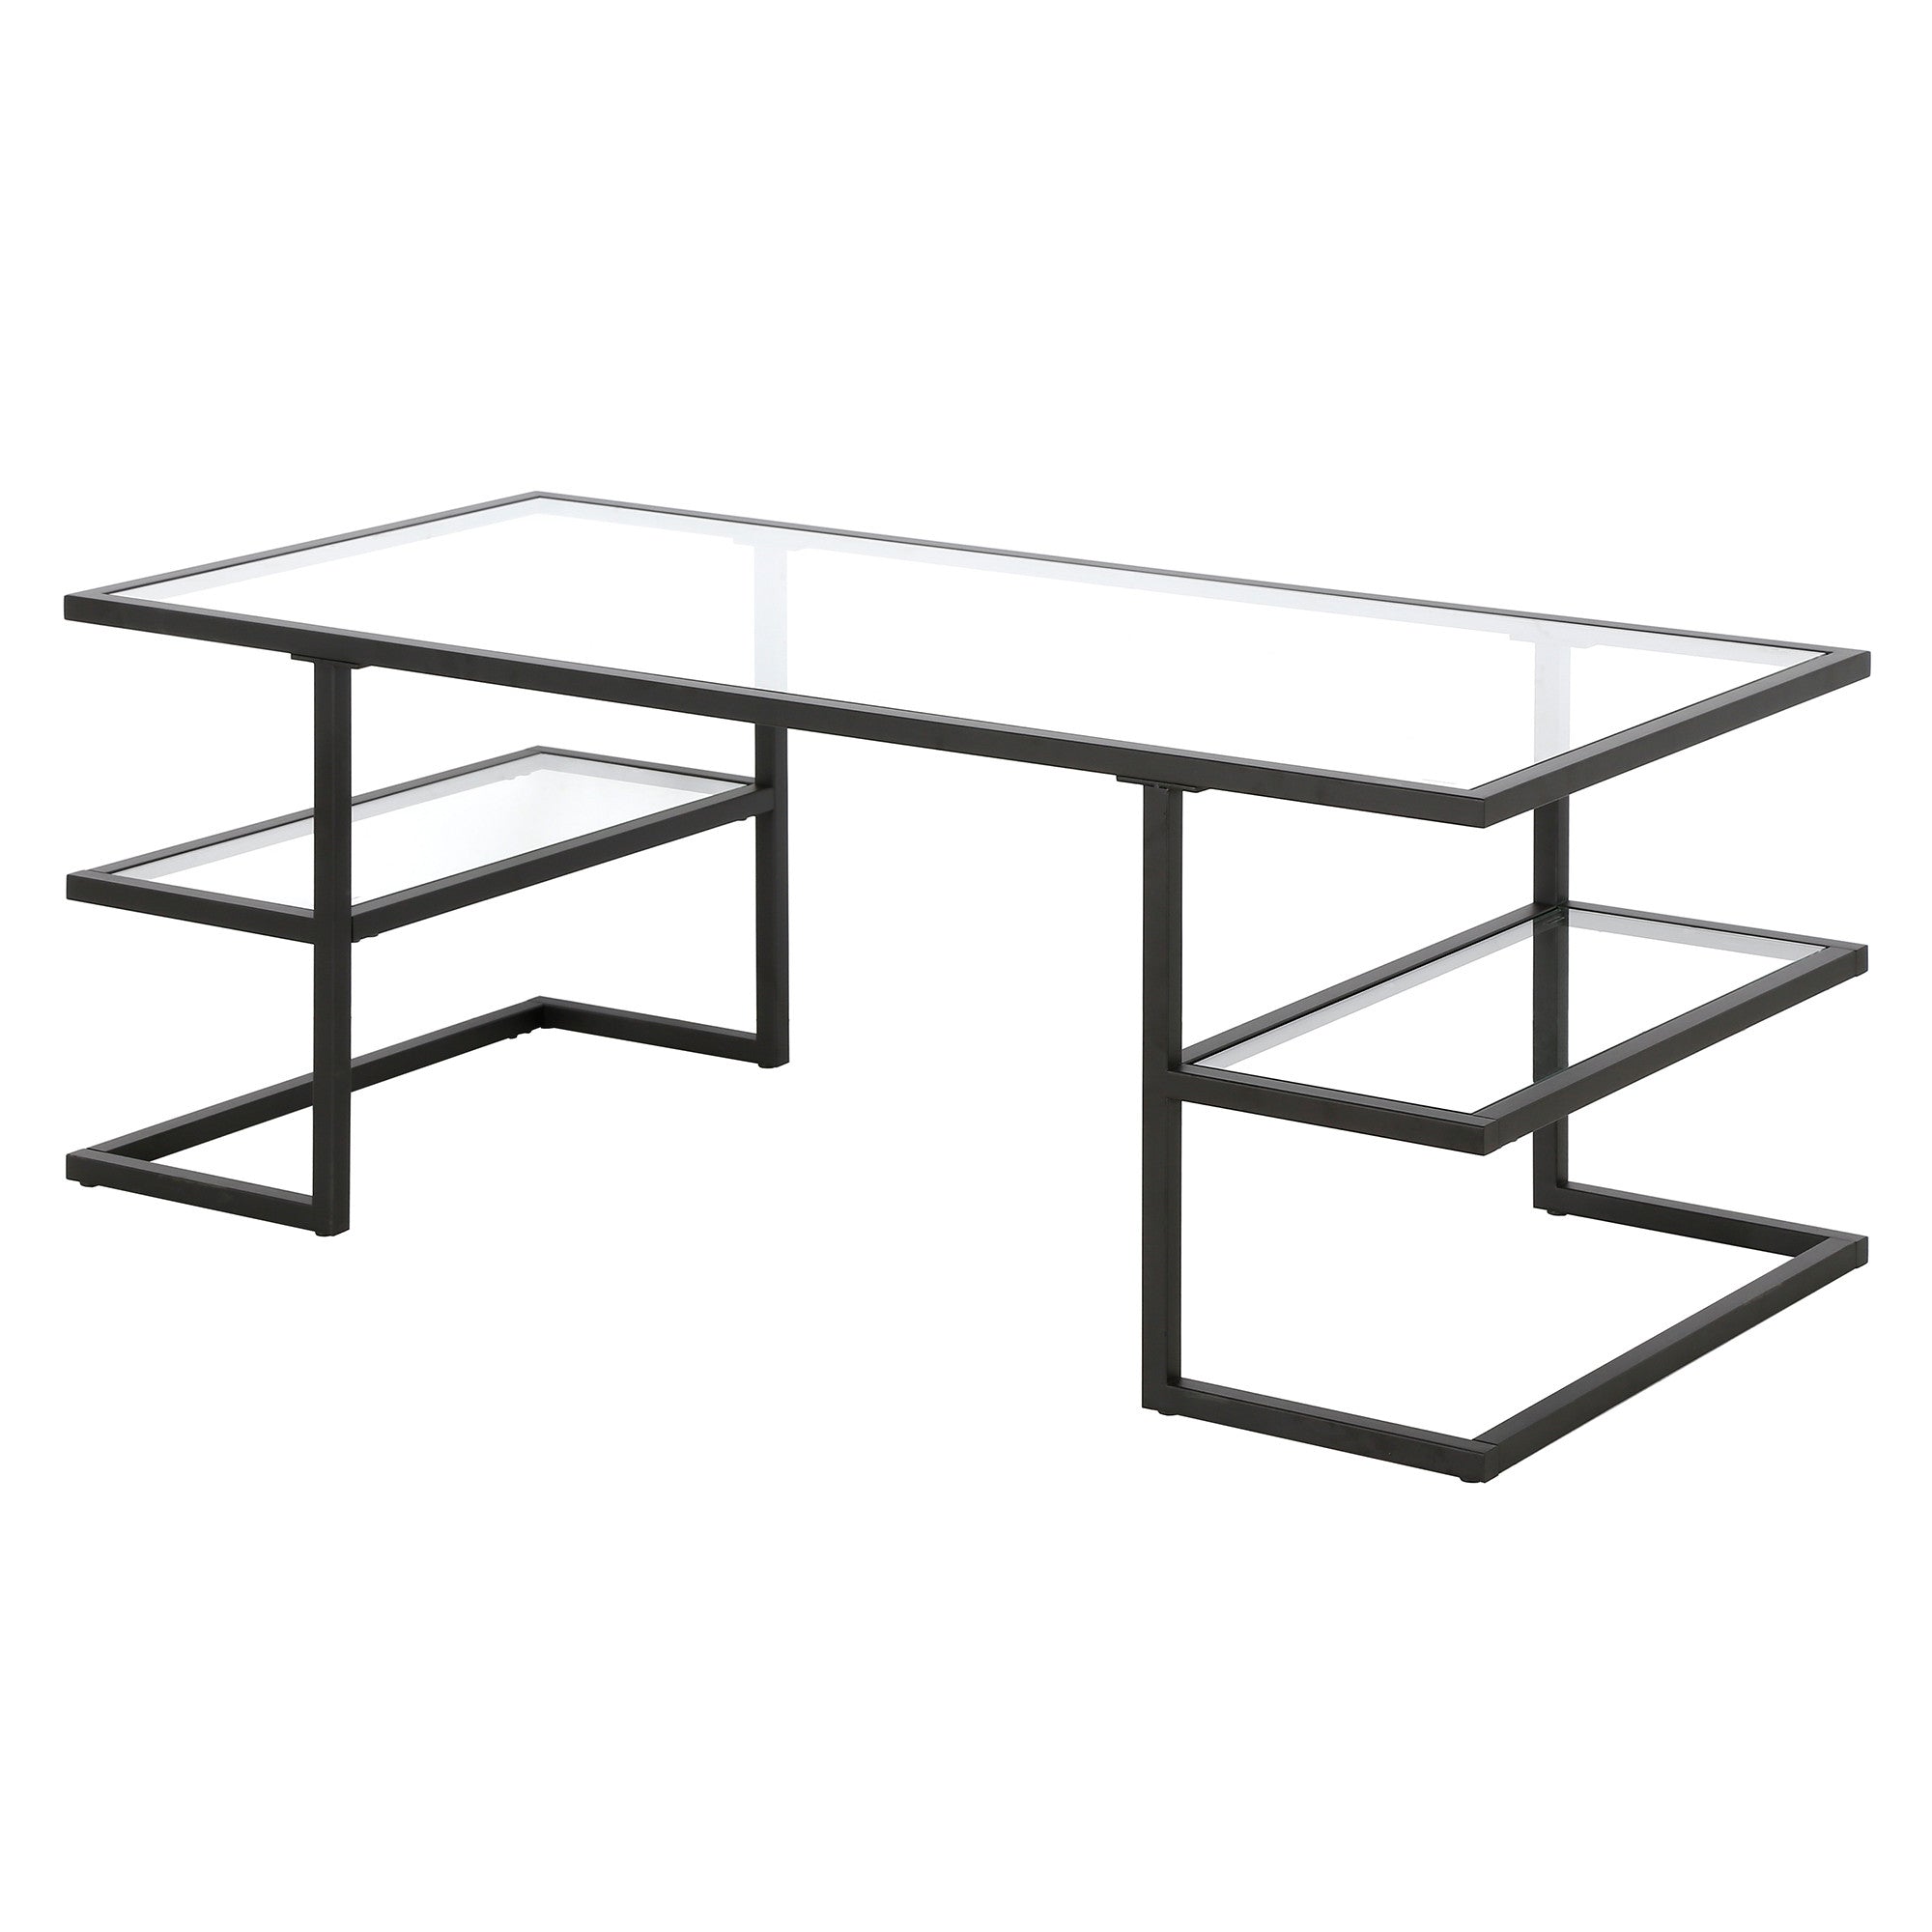 47" Black Glass And Steel Coffee Table With Two Shelves